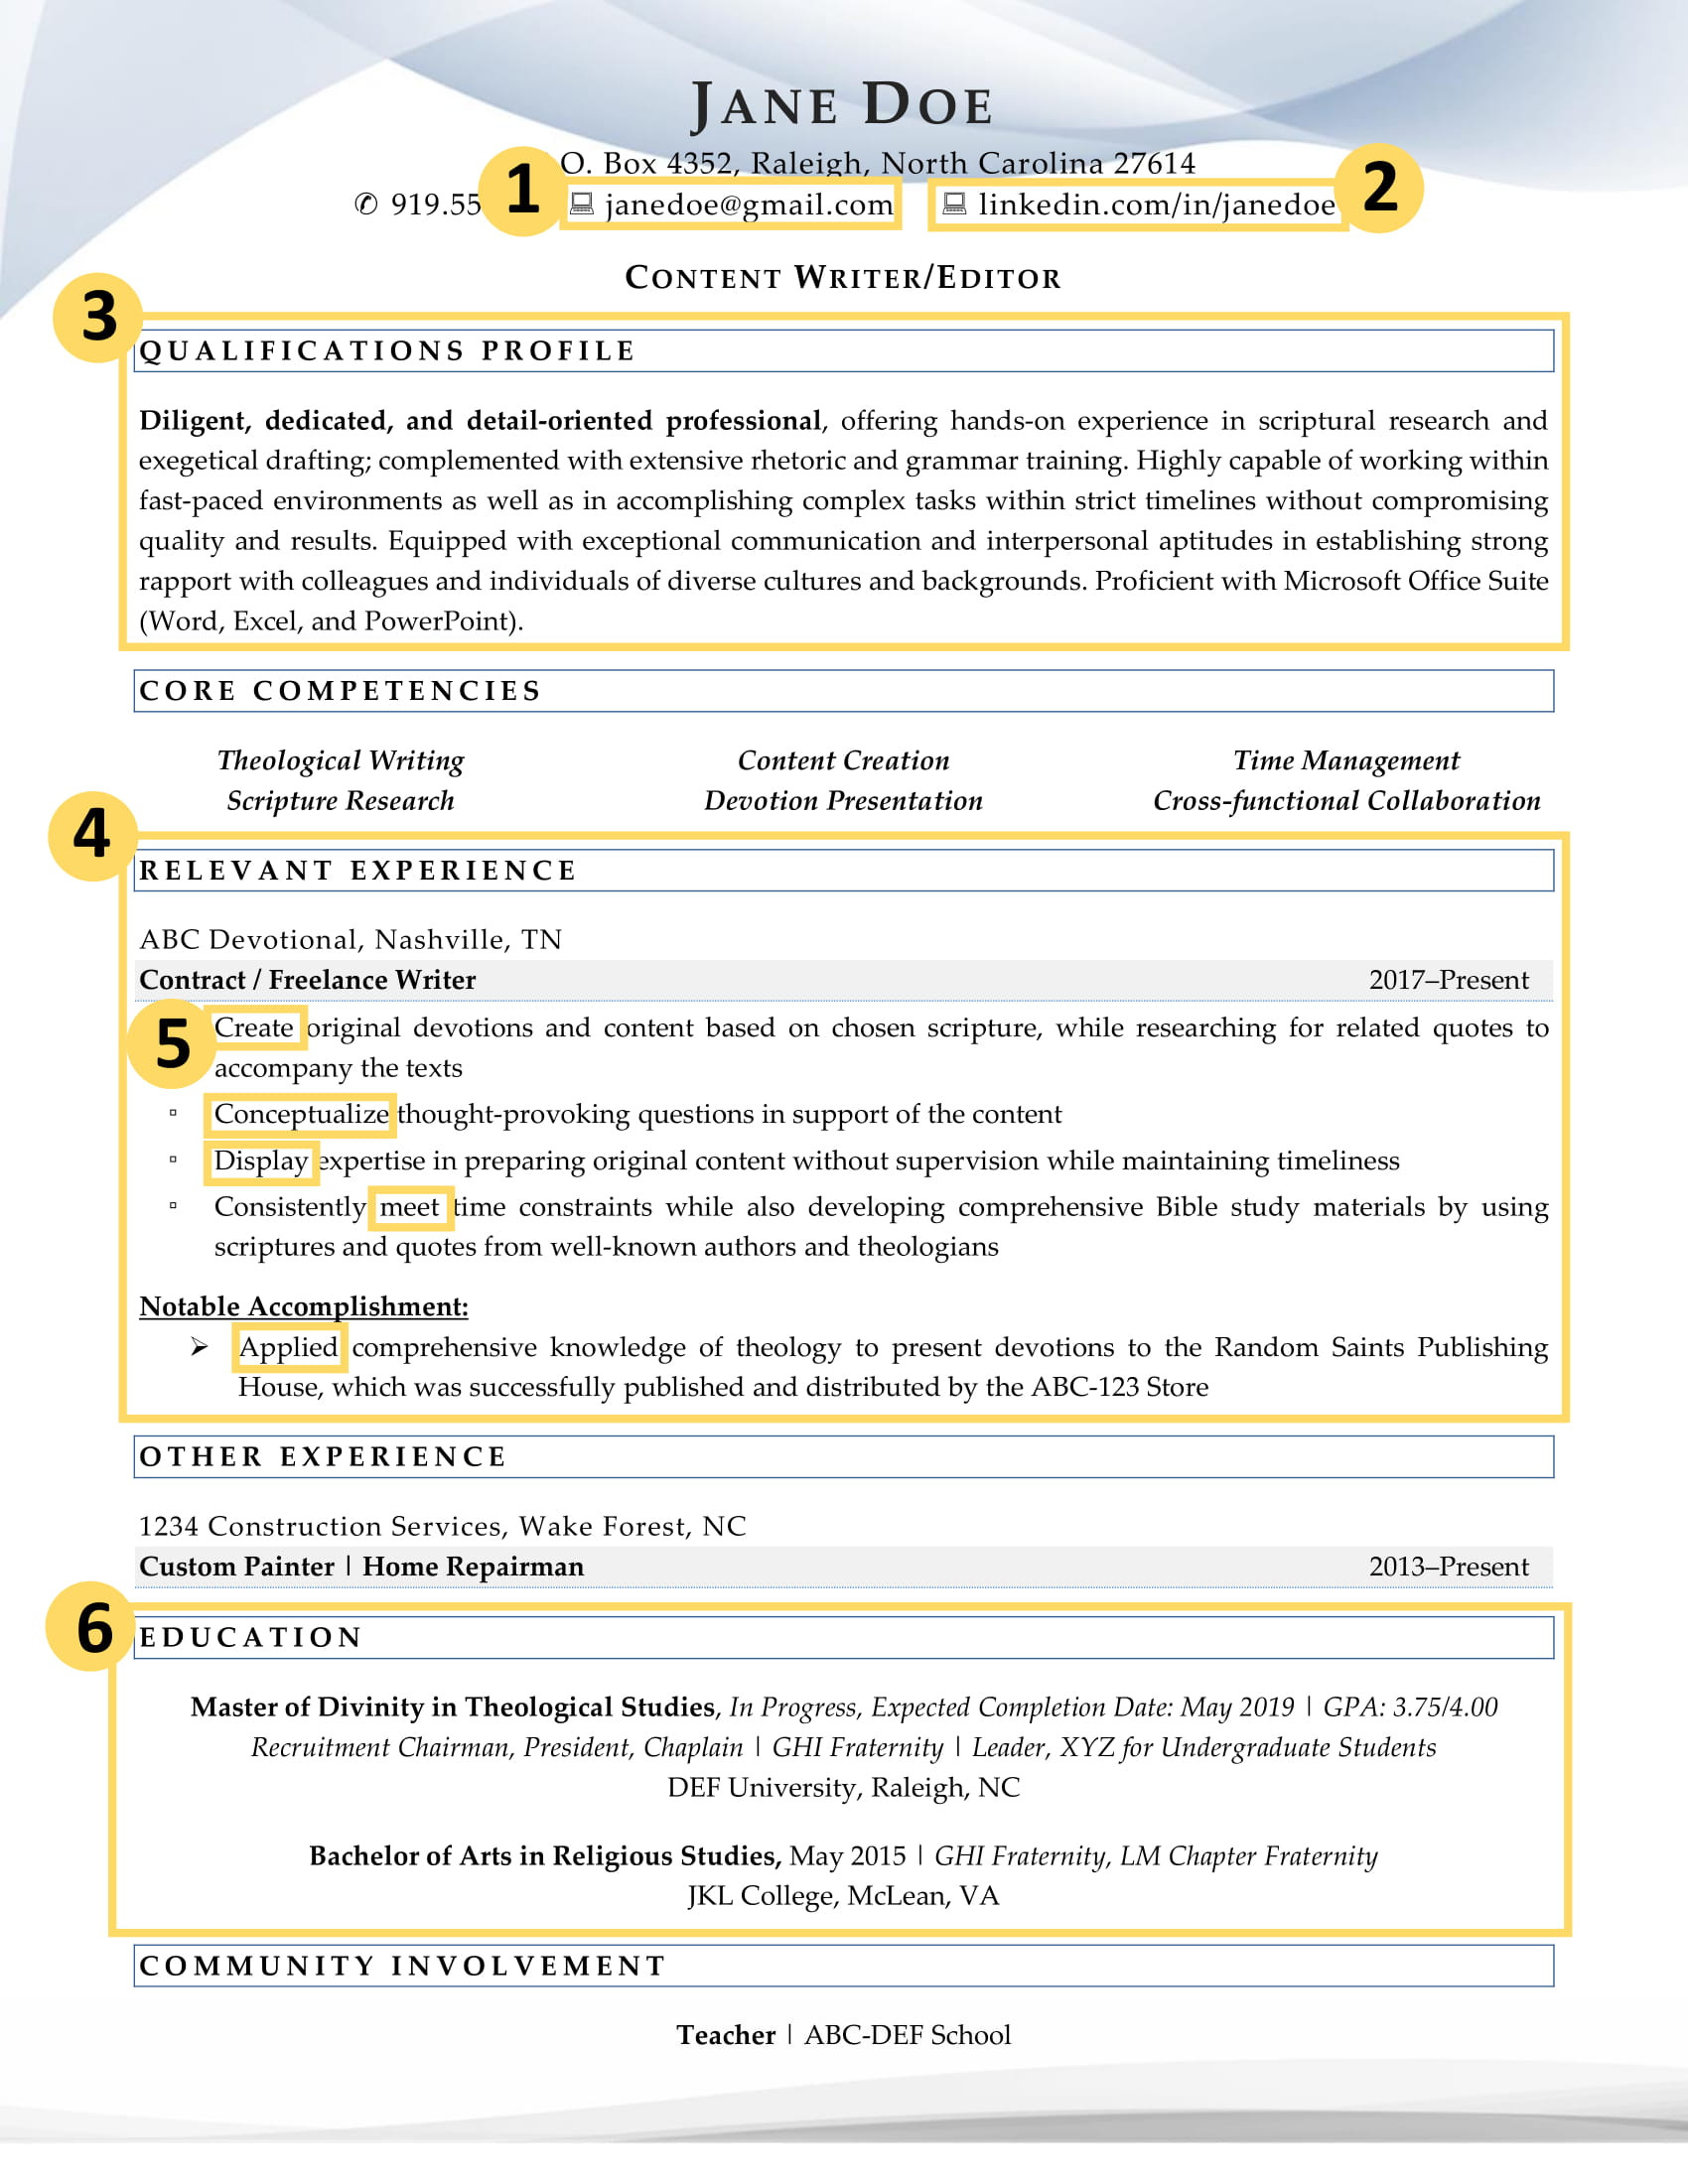 Best Resume Template for Recent College Graduate Recent College Graduate Resume: 10 Factors that Make It Excellent